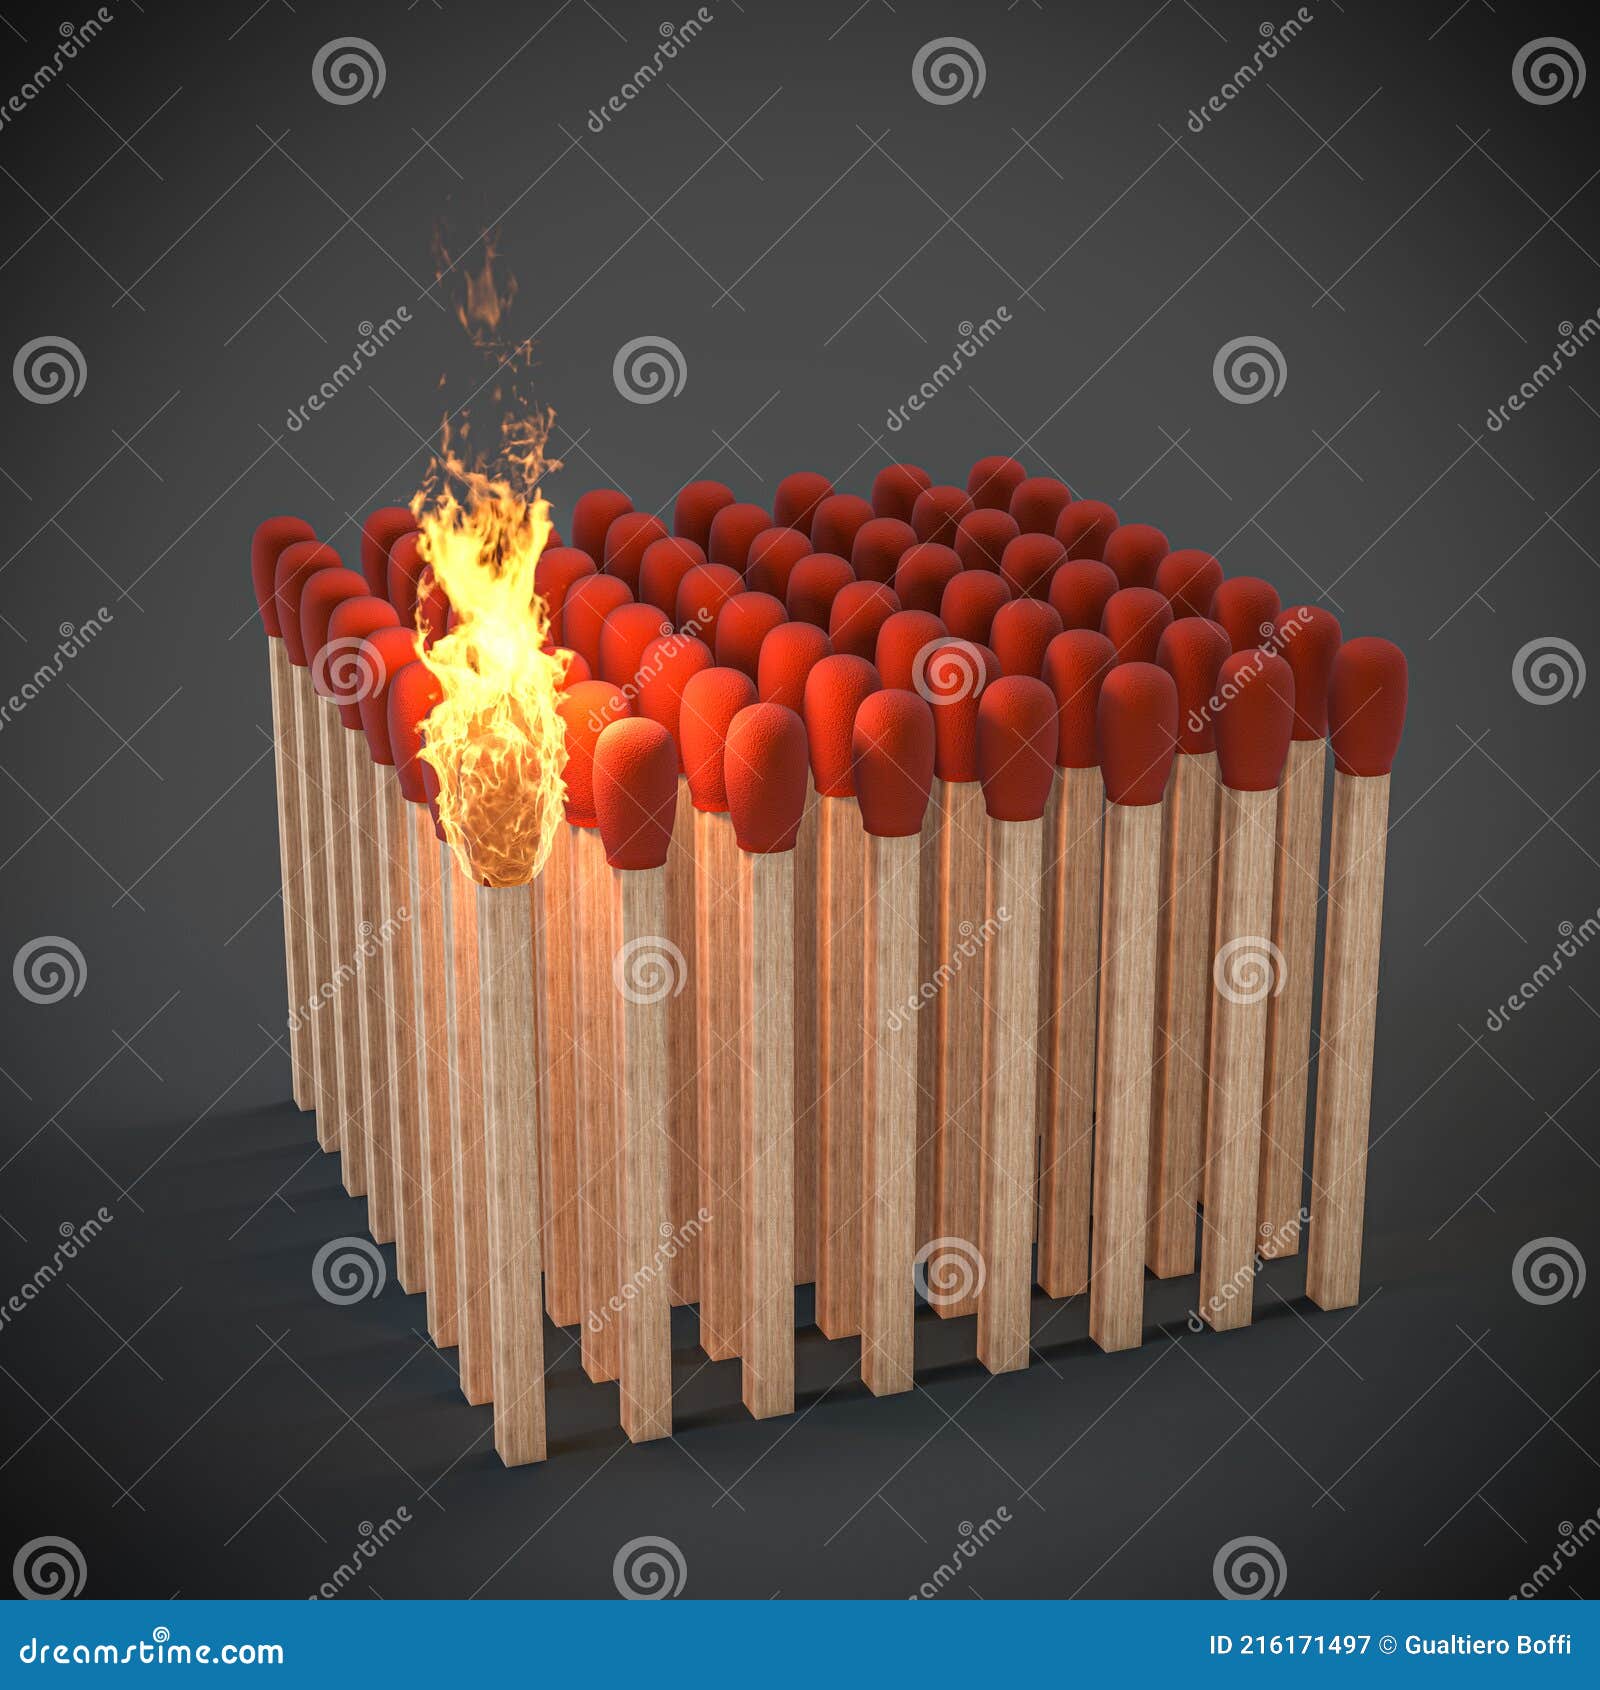 matches about to catch fire. concept of imminent danger